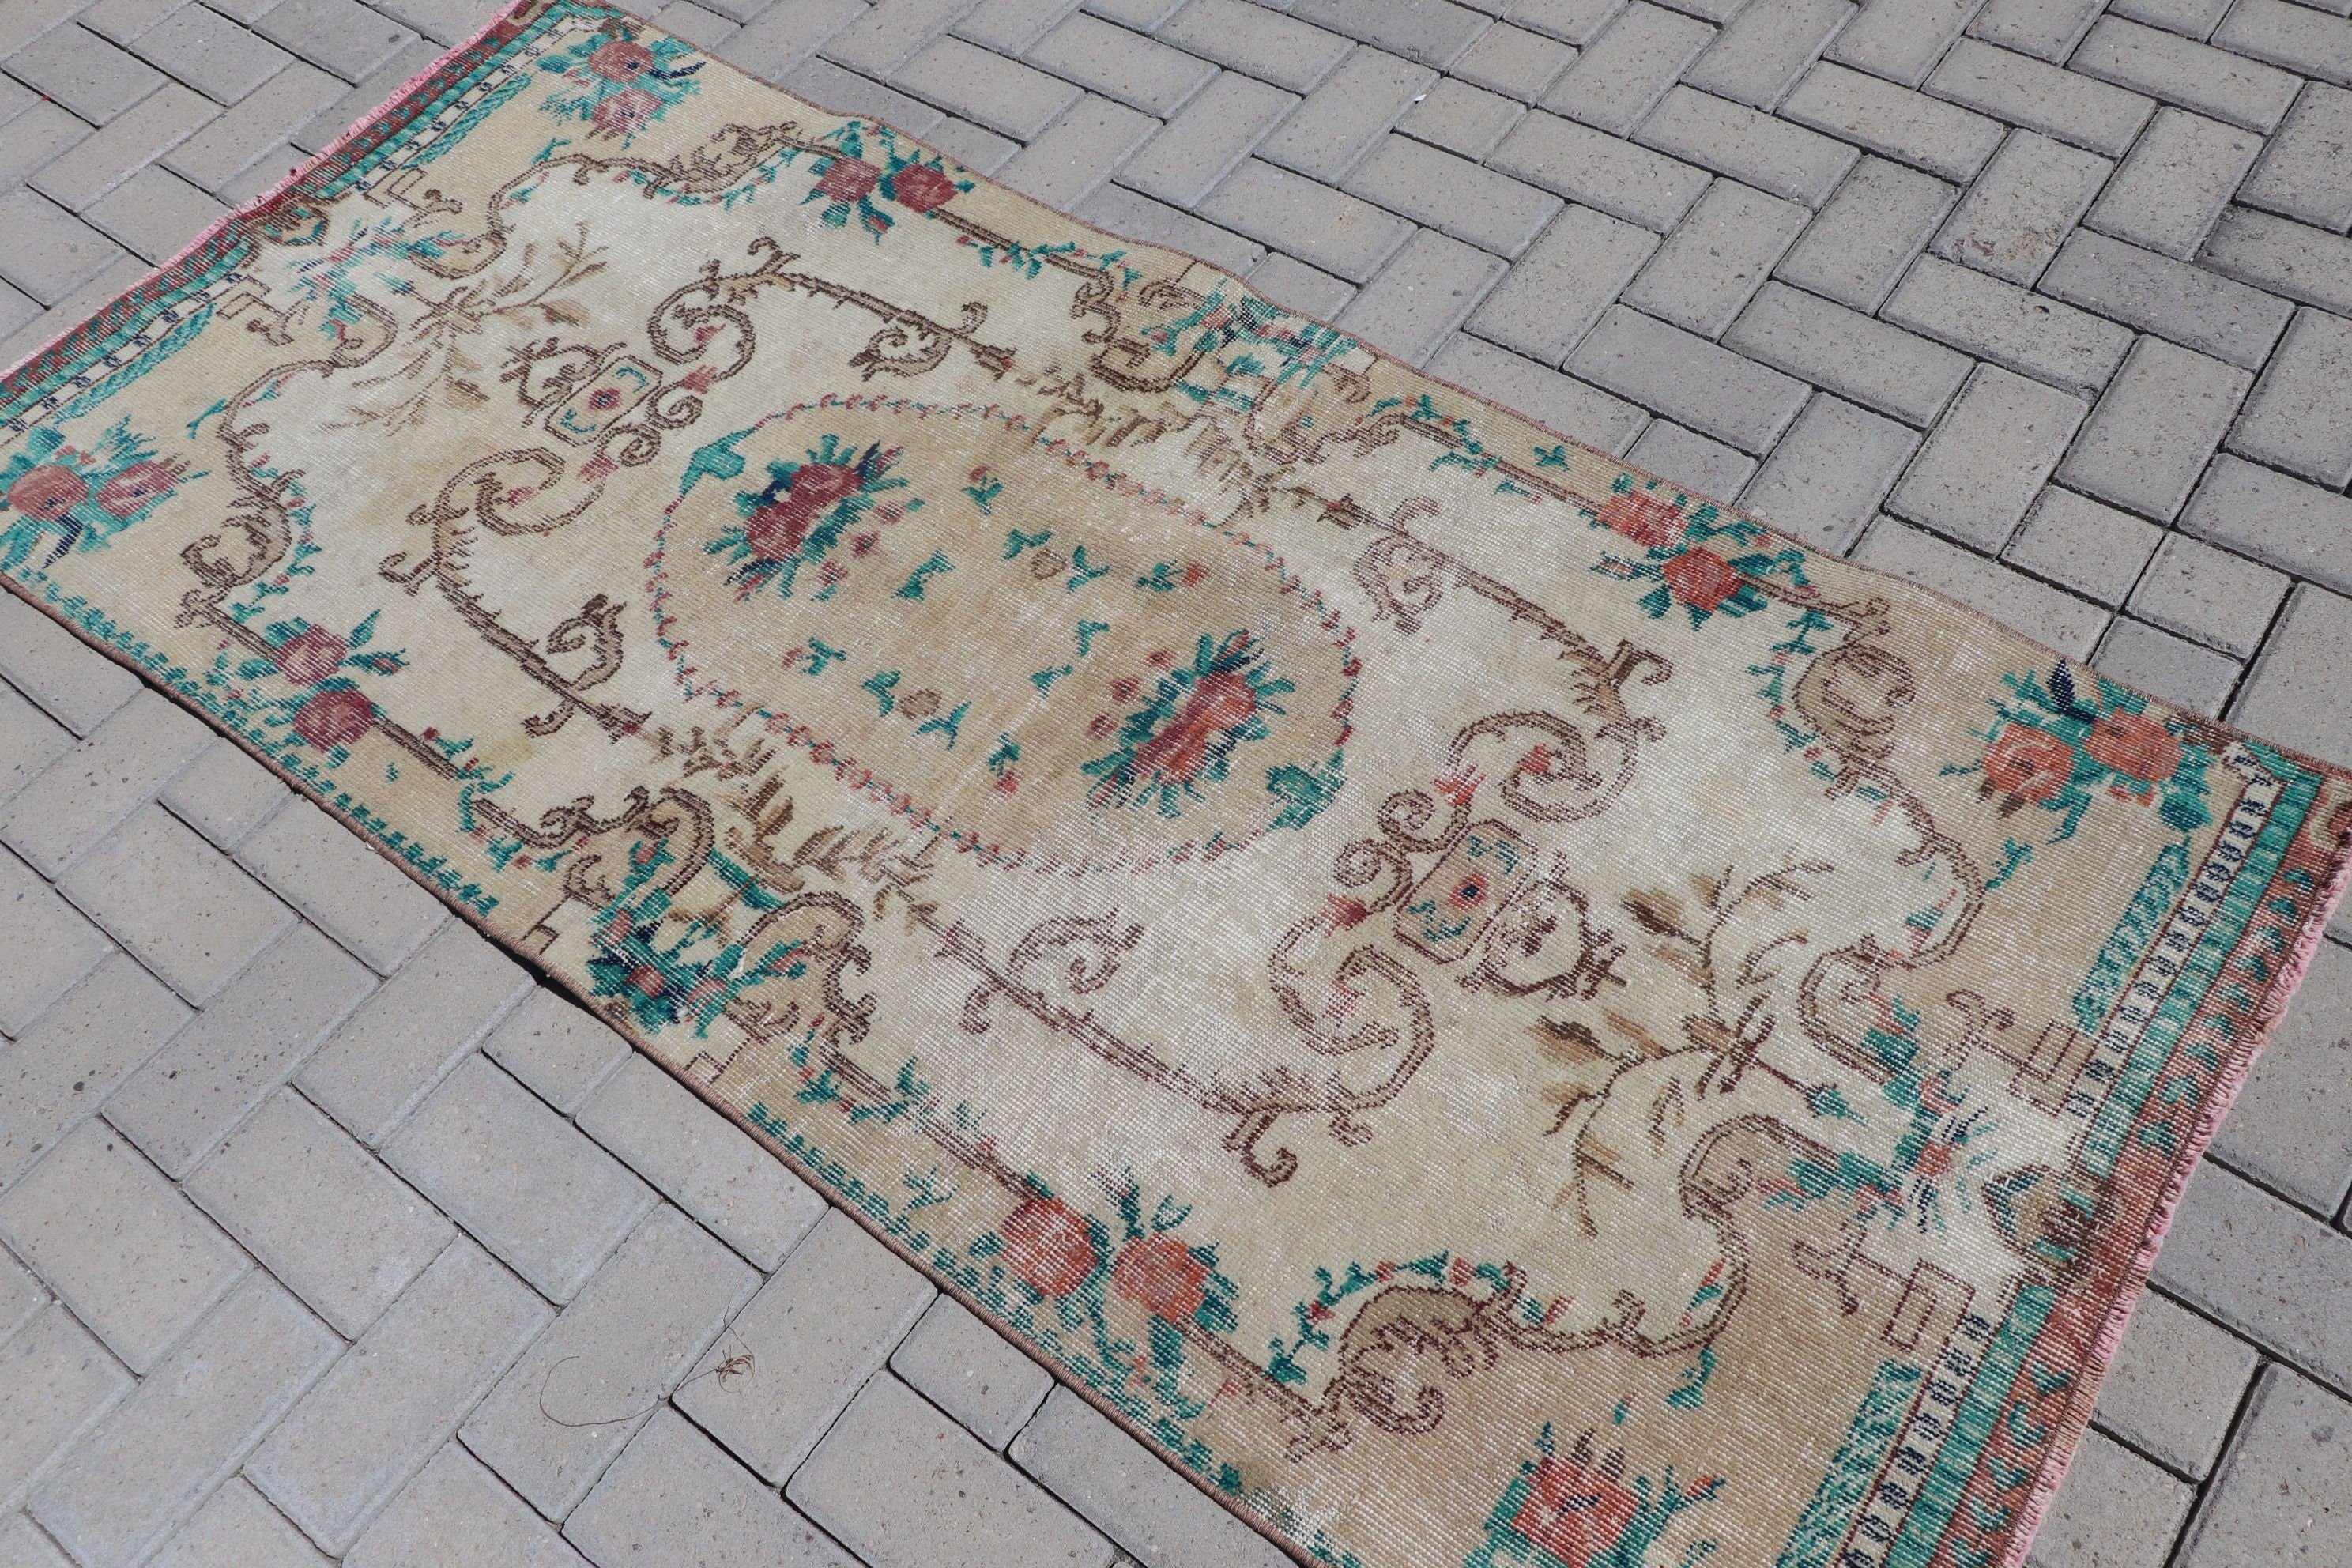 Entry Rug, Oriental Rug, Rugs for Entry, 2.9x6.5 ft Accent Rug, Beige Kitchen Rug, Muted Rug, Vintage Rugs, Moroccan Rugs, Turkish Rug